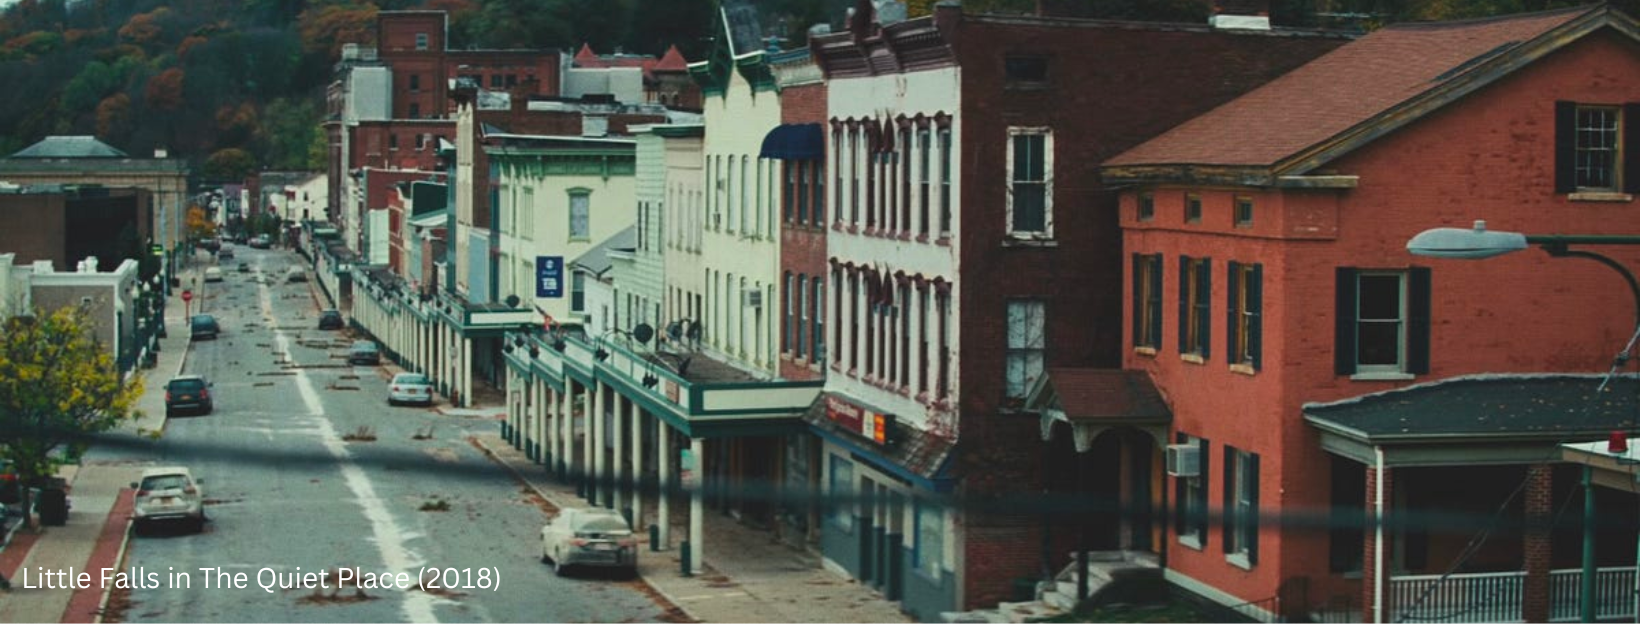 Little Falls Main Street featured in a scene of the movie "The Quiet Place"